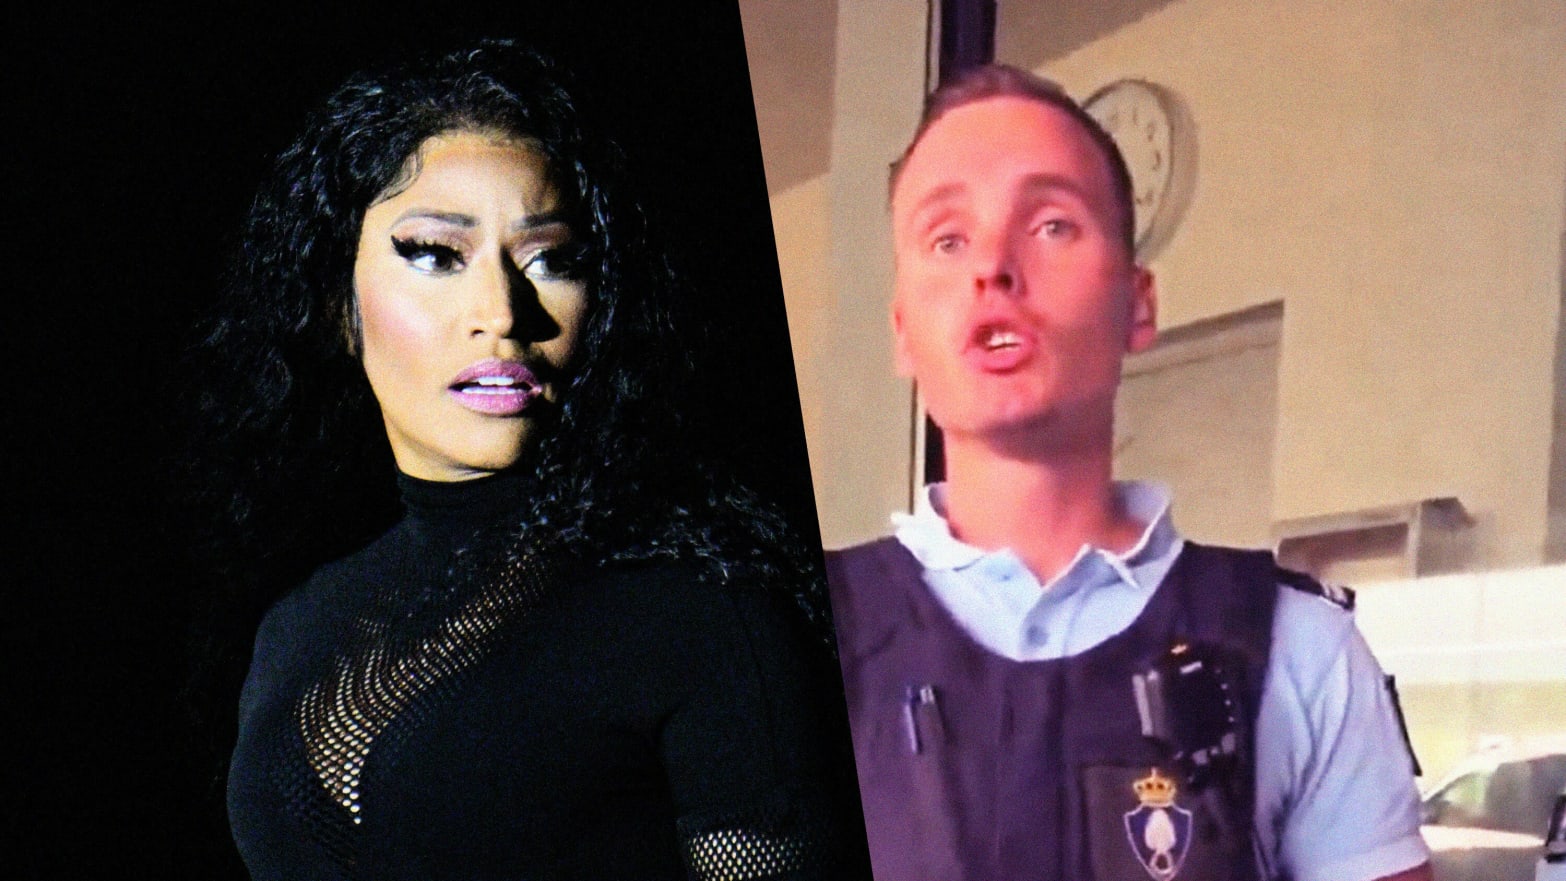 Nicki MInaj and the cop who arrested her in Amsterdam